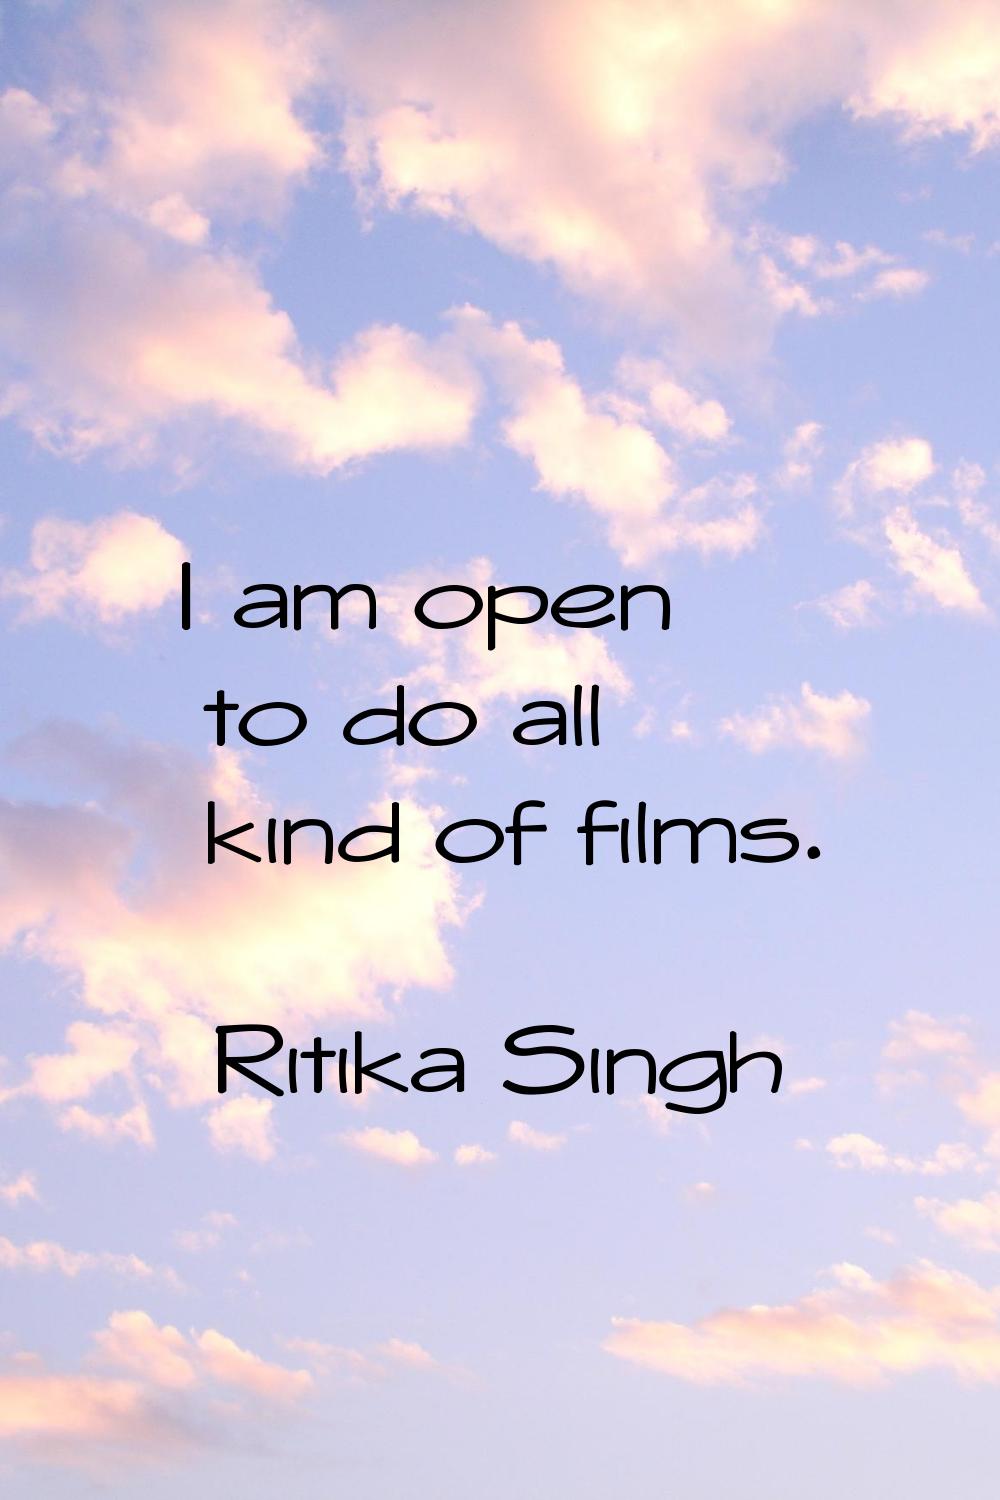 I am open to do all kind of films.